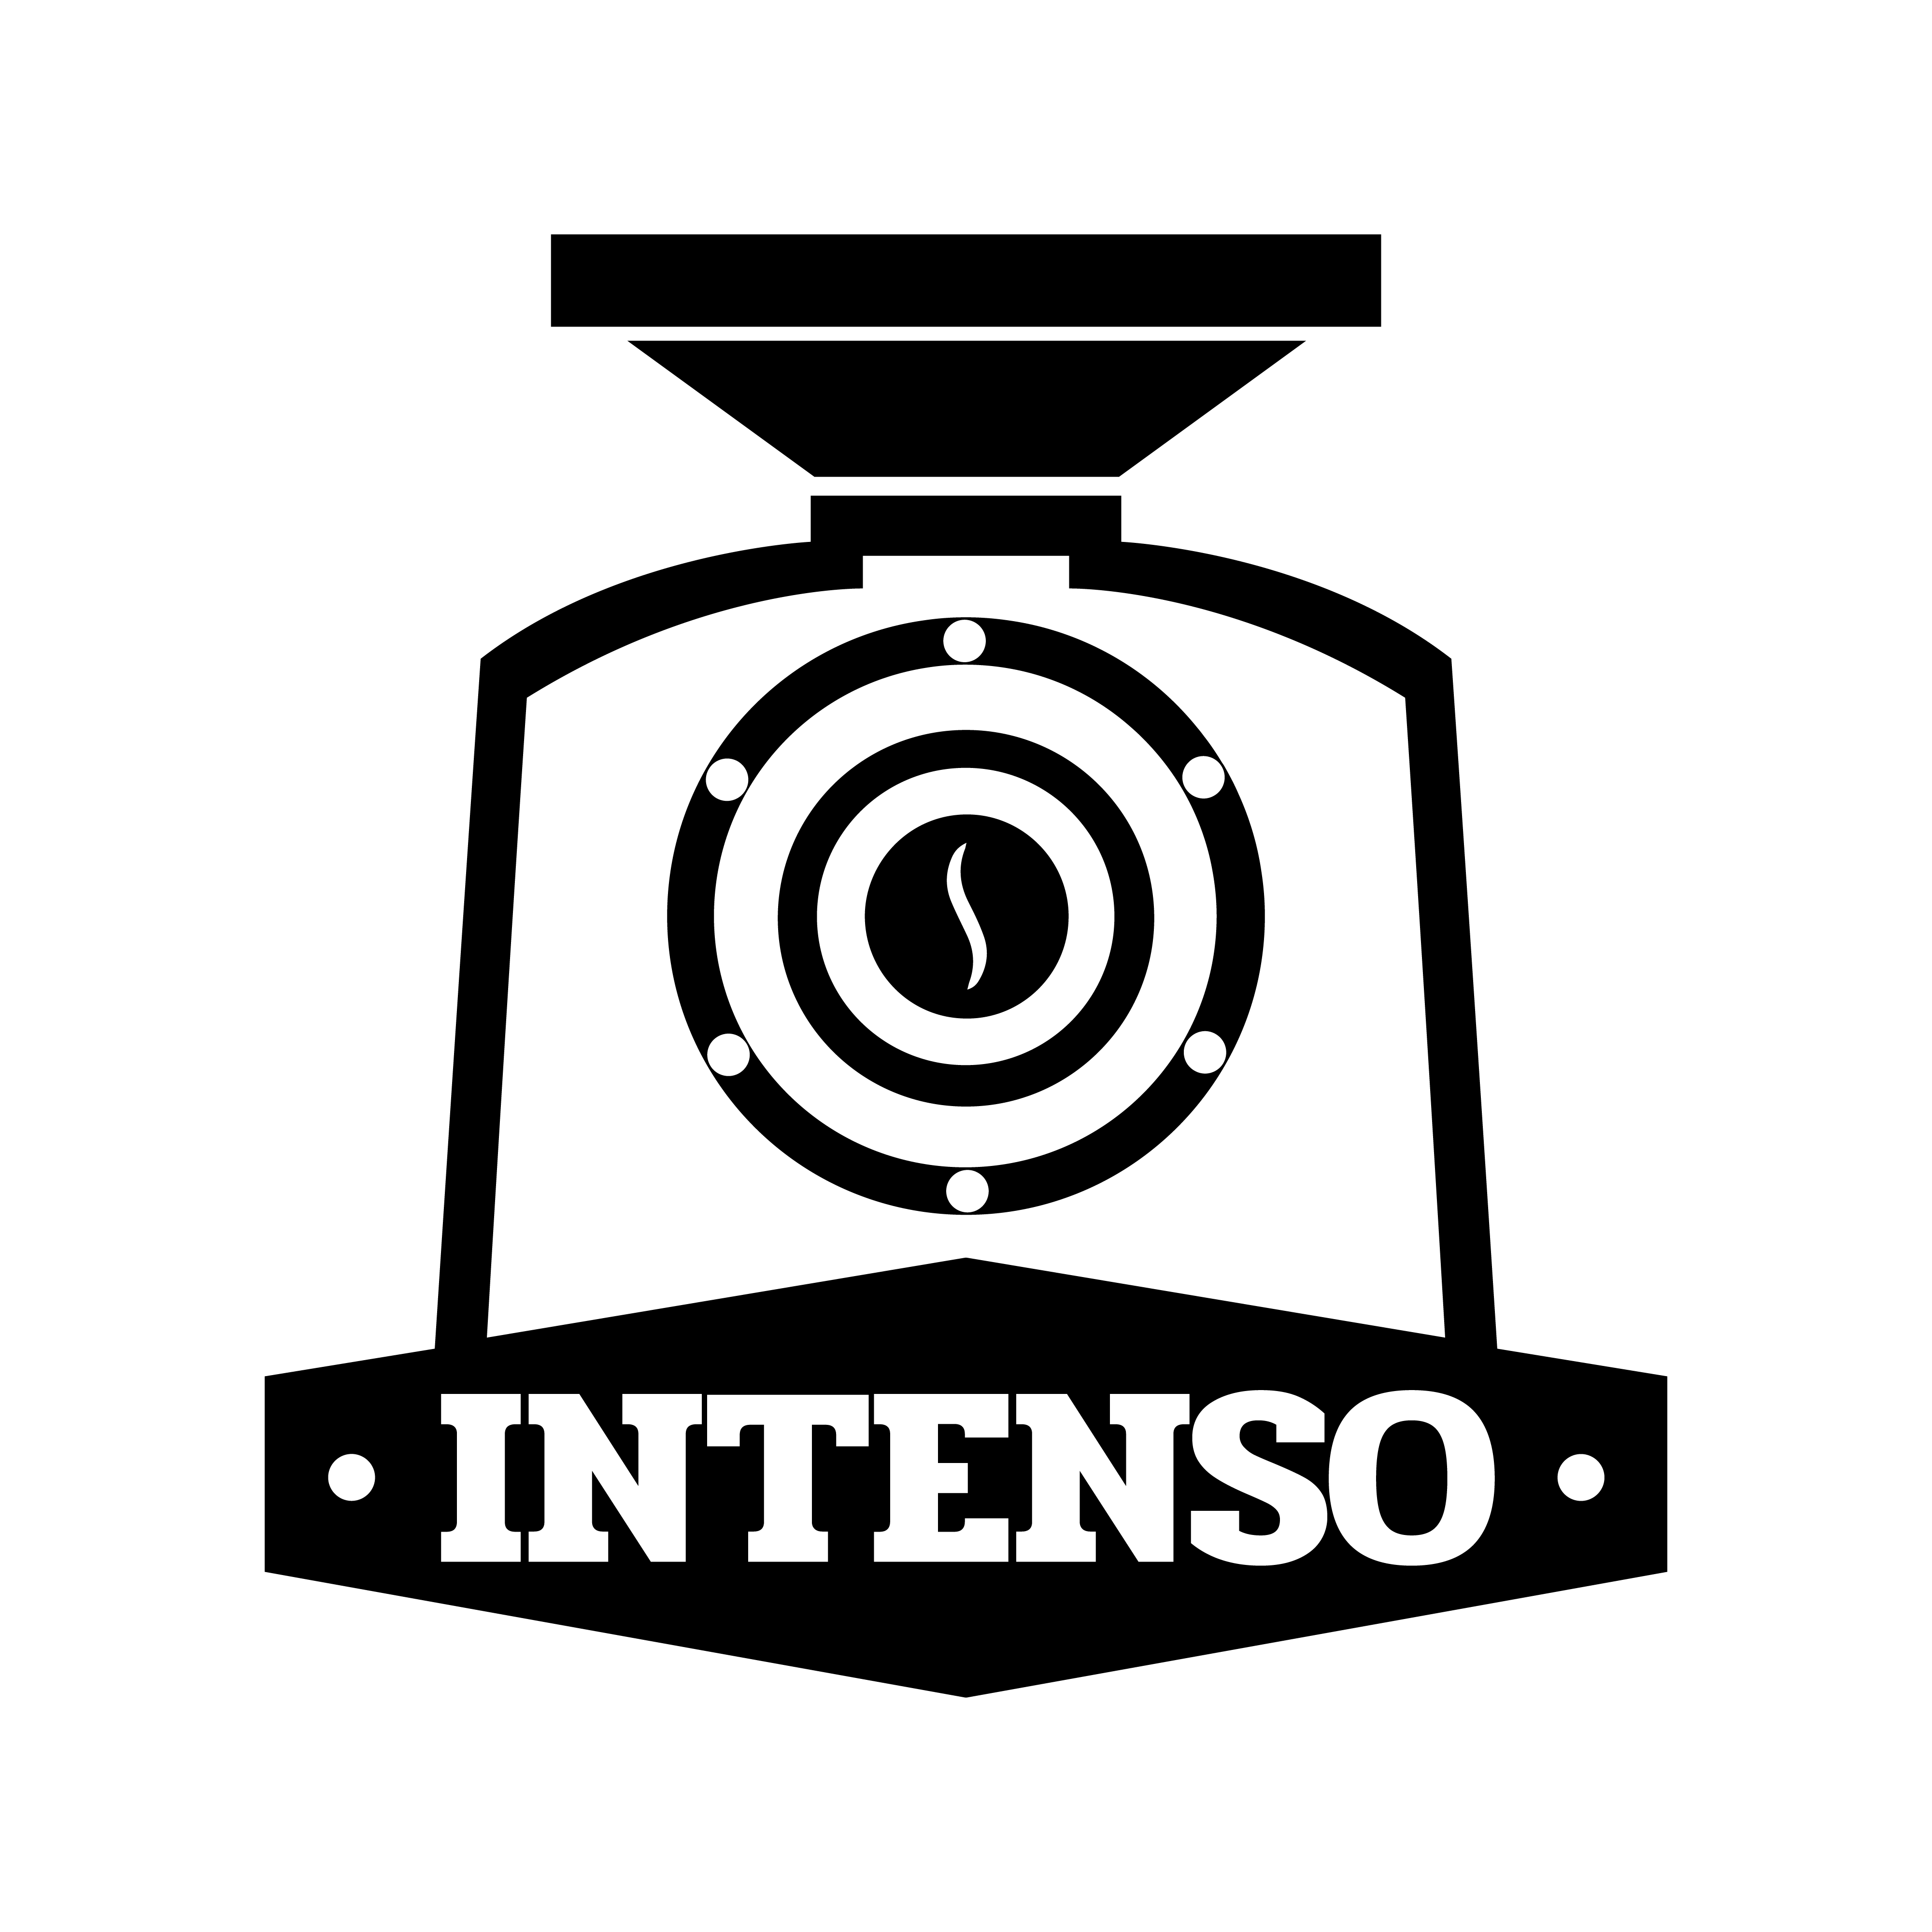 INTENSO COFFEE ROASTER - 2ND MILE SPECIALTY VIỆT NAMCO., LTD